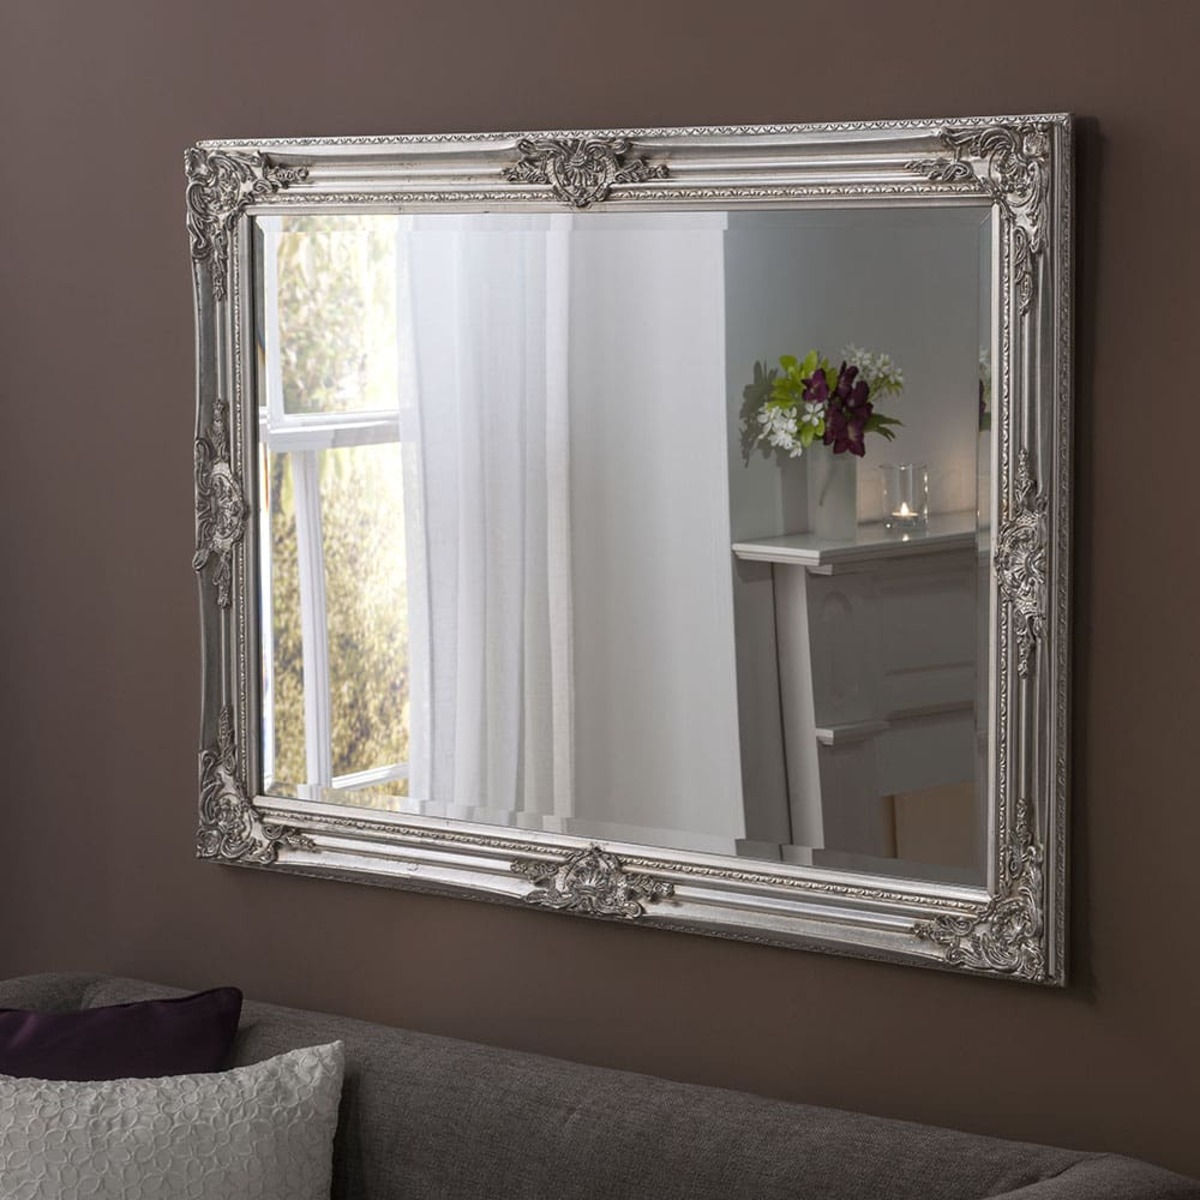 How To Silver A Mirror